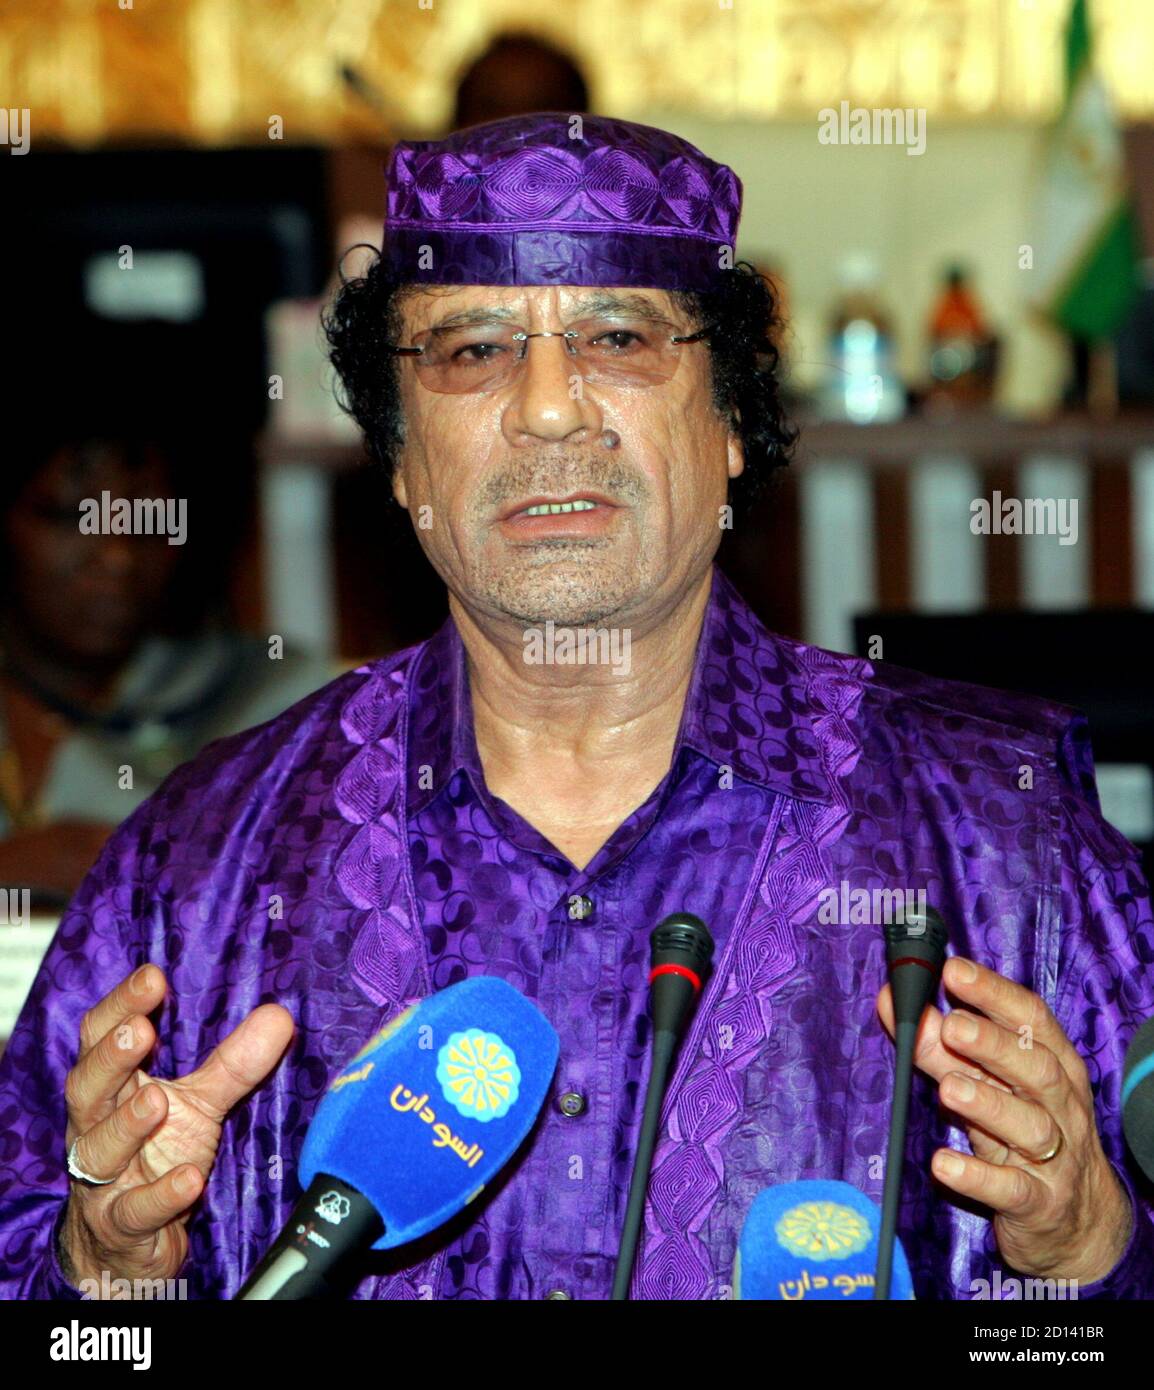 Libyan leader colonel Muammar Gaddafi addresses the media during the official closing ceremony of the Sixth African Union Summit in Sudanese capital Khartoum January 24, 2006. [The African Union on Tuesday chose Congo Republic as a compromise to chair the organisation after Sudan's leadership bid was derailed by fears that its poor human rights record could damage the continent's credibility. Under the deal, Sudan will head the 53-nation body after Congo Republic steps down next year.] Stock Photo